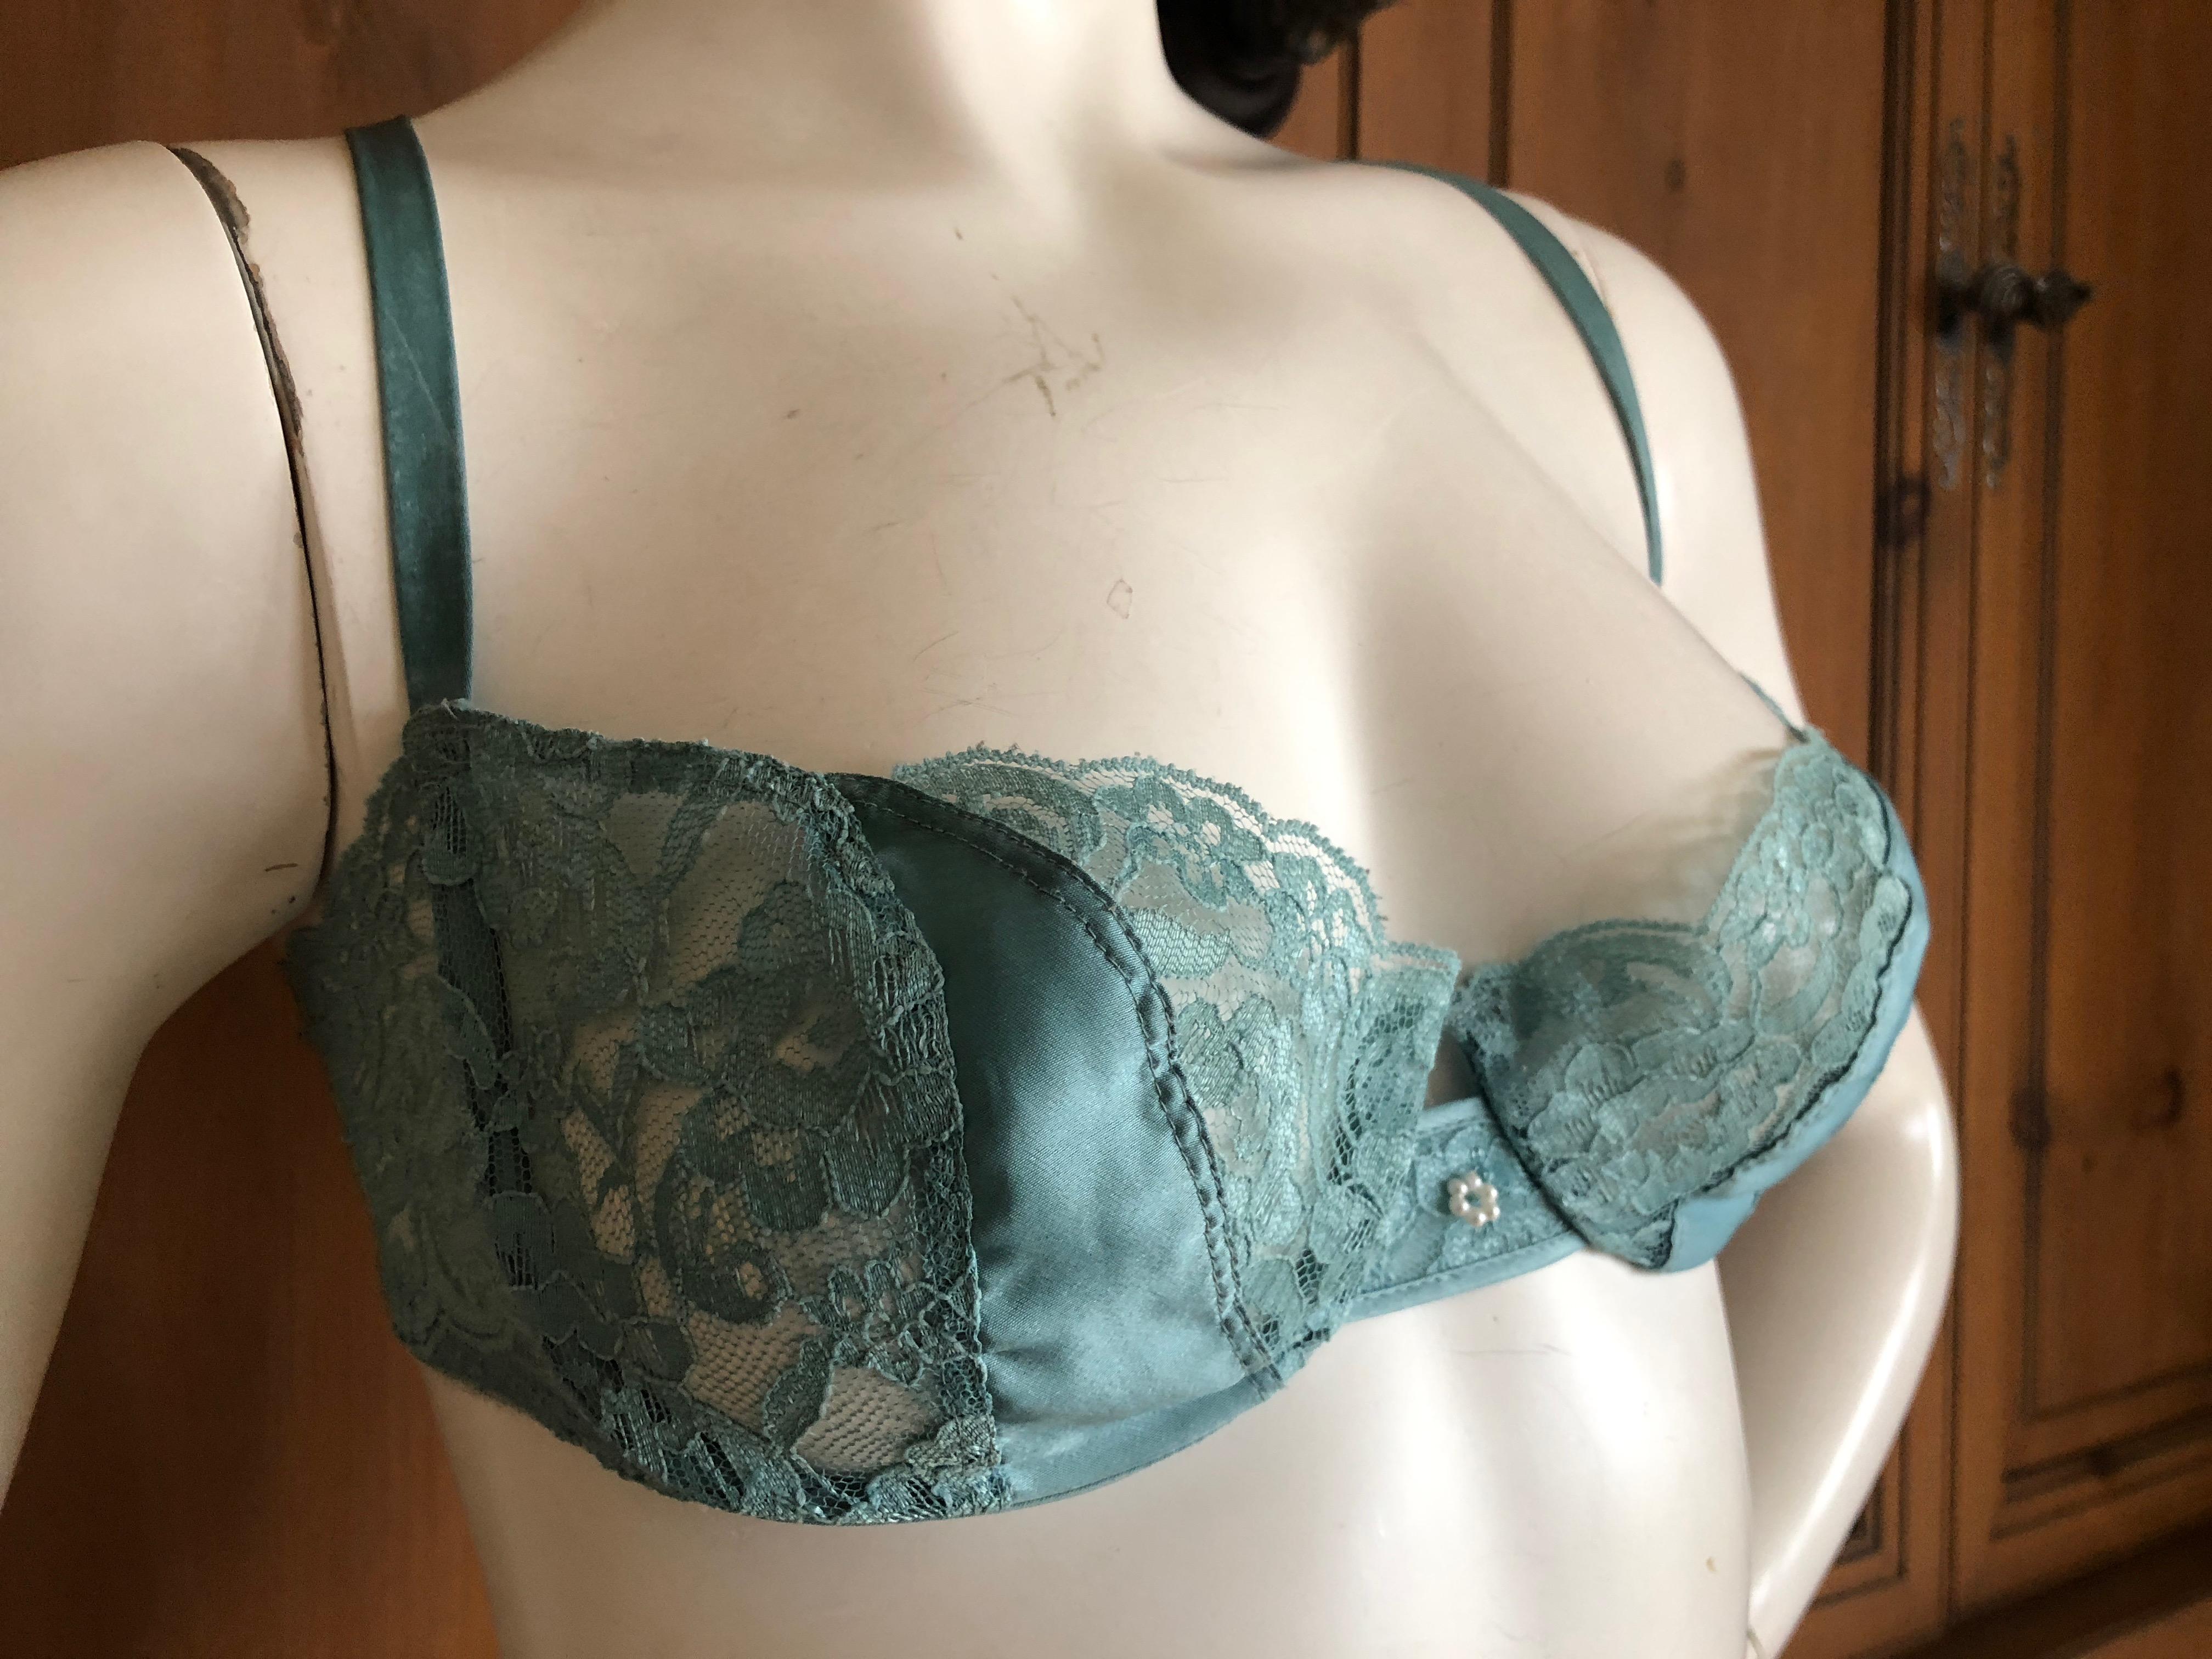 Wonderful vintage lace bra from Christian Dior 
Marked Fr 90 (34C)
Bust 29